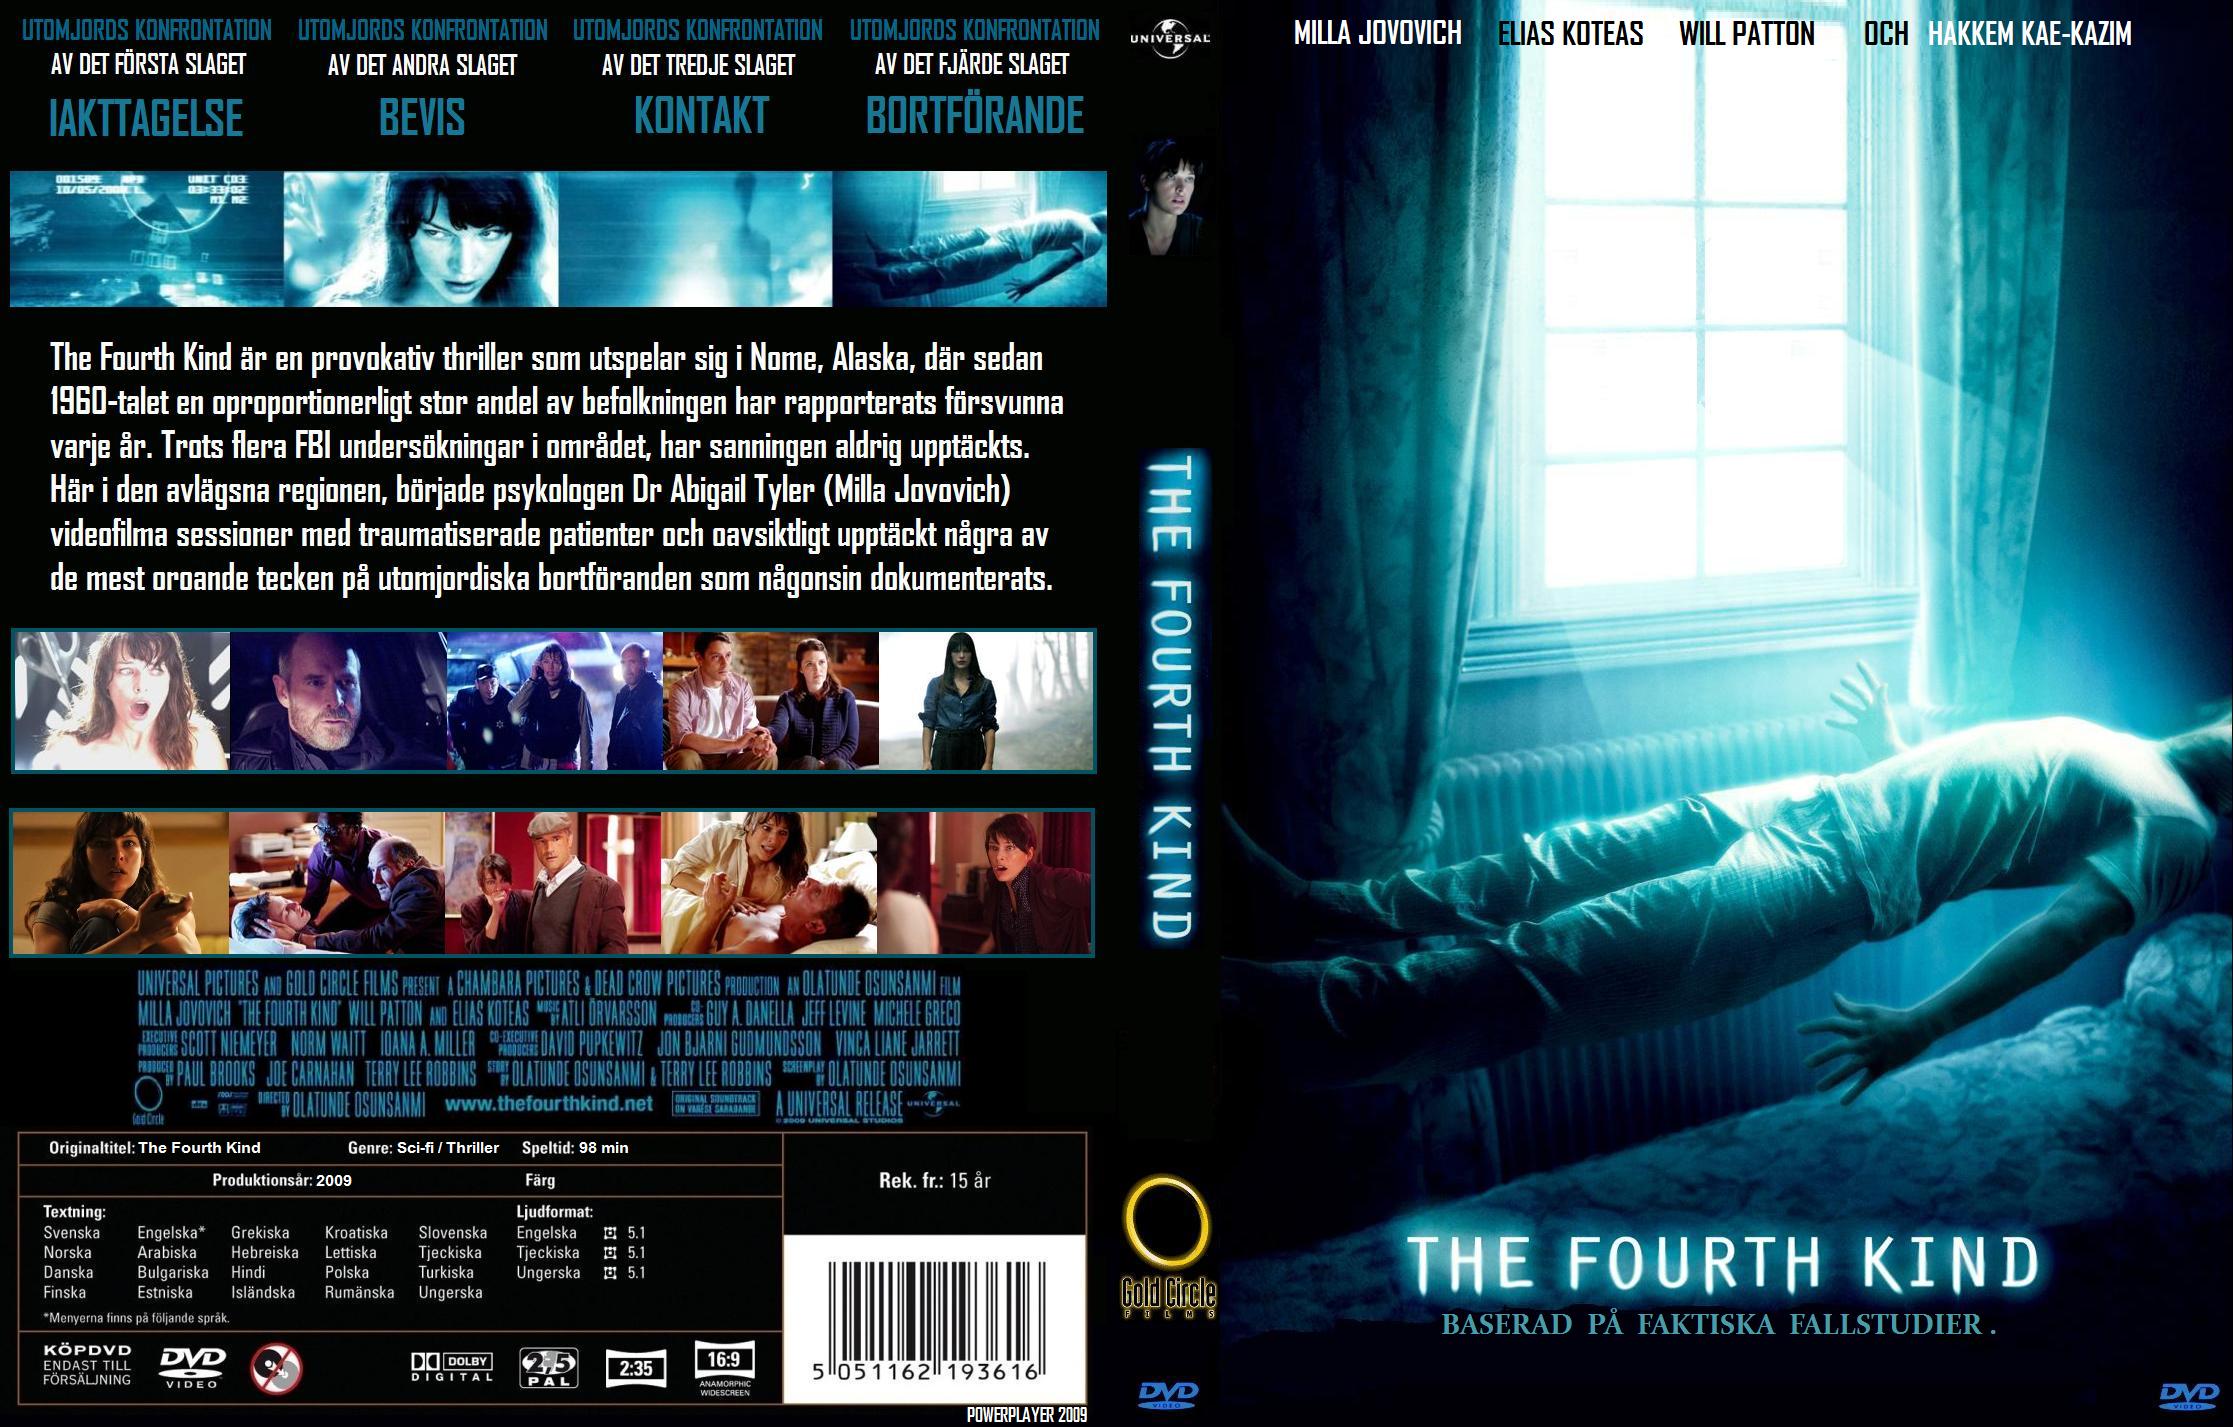 The Fourth Kind #22